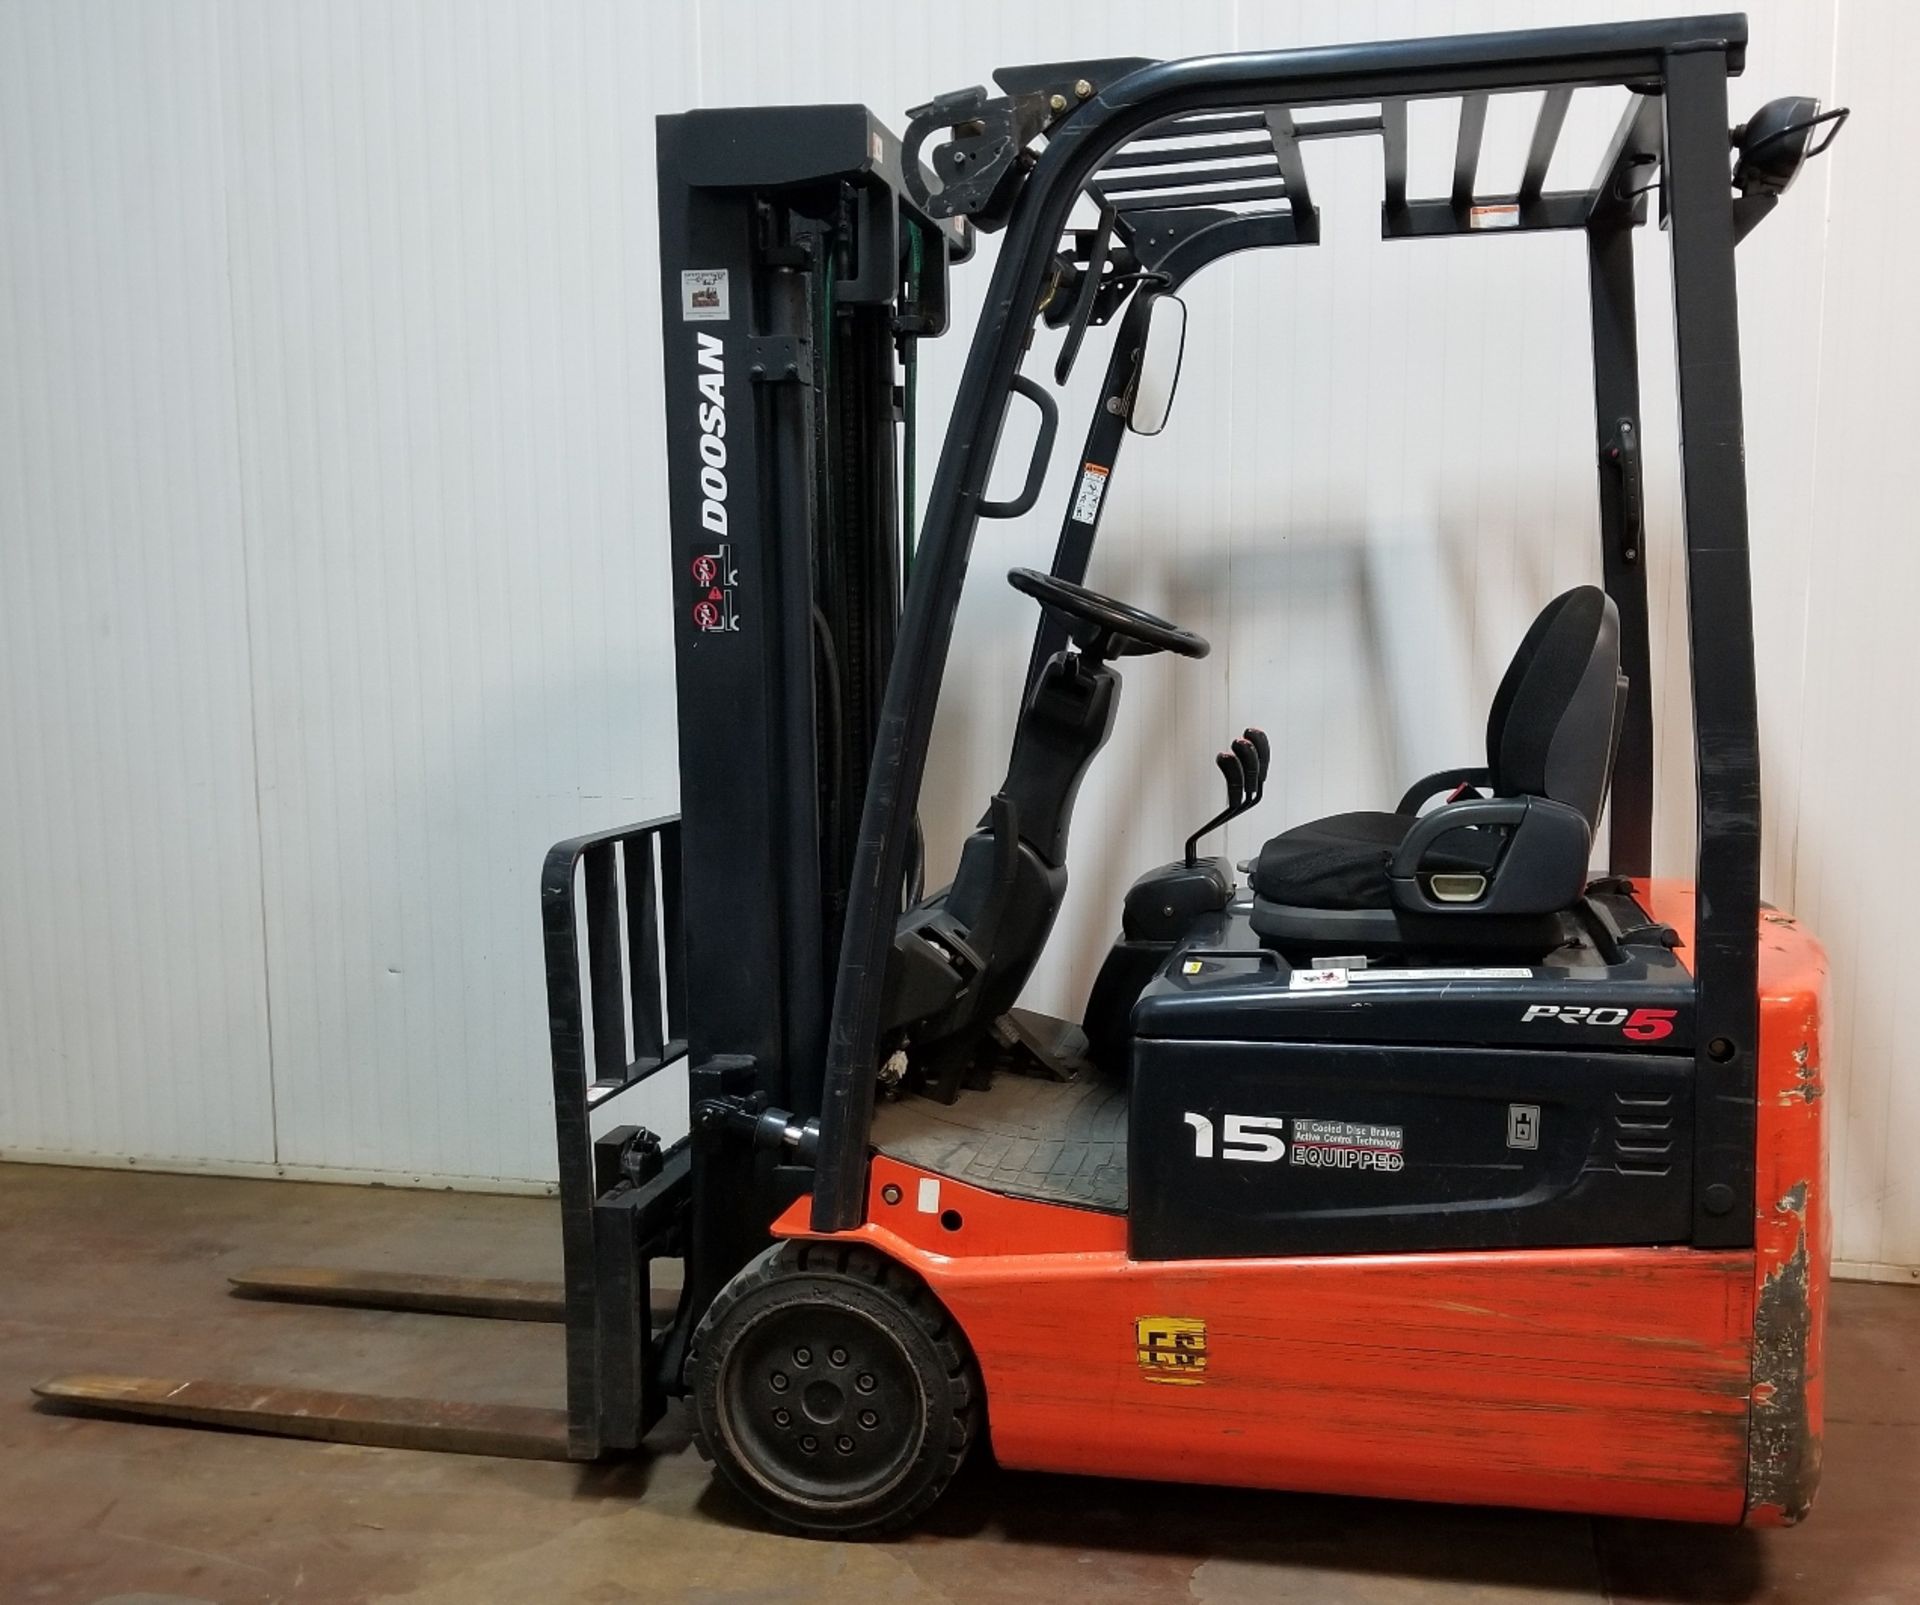 DOOSAN (2008) B15T-5 3,000 LB. CAPACITY 48V 3-WHEEL ELECTRIC FORKLIFT WITH 188" MAX. LIFT HEIGHT, - Image 2 of 2